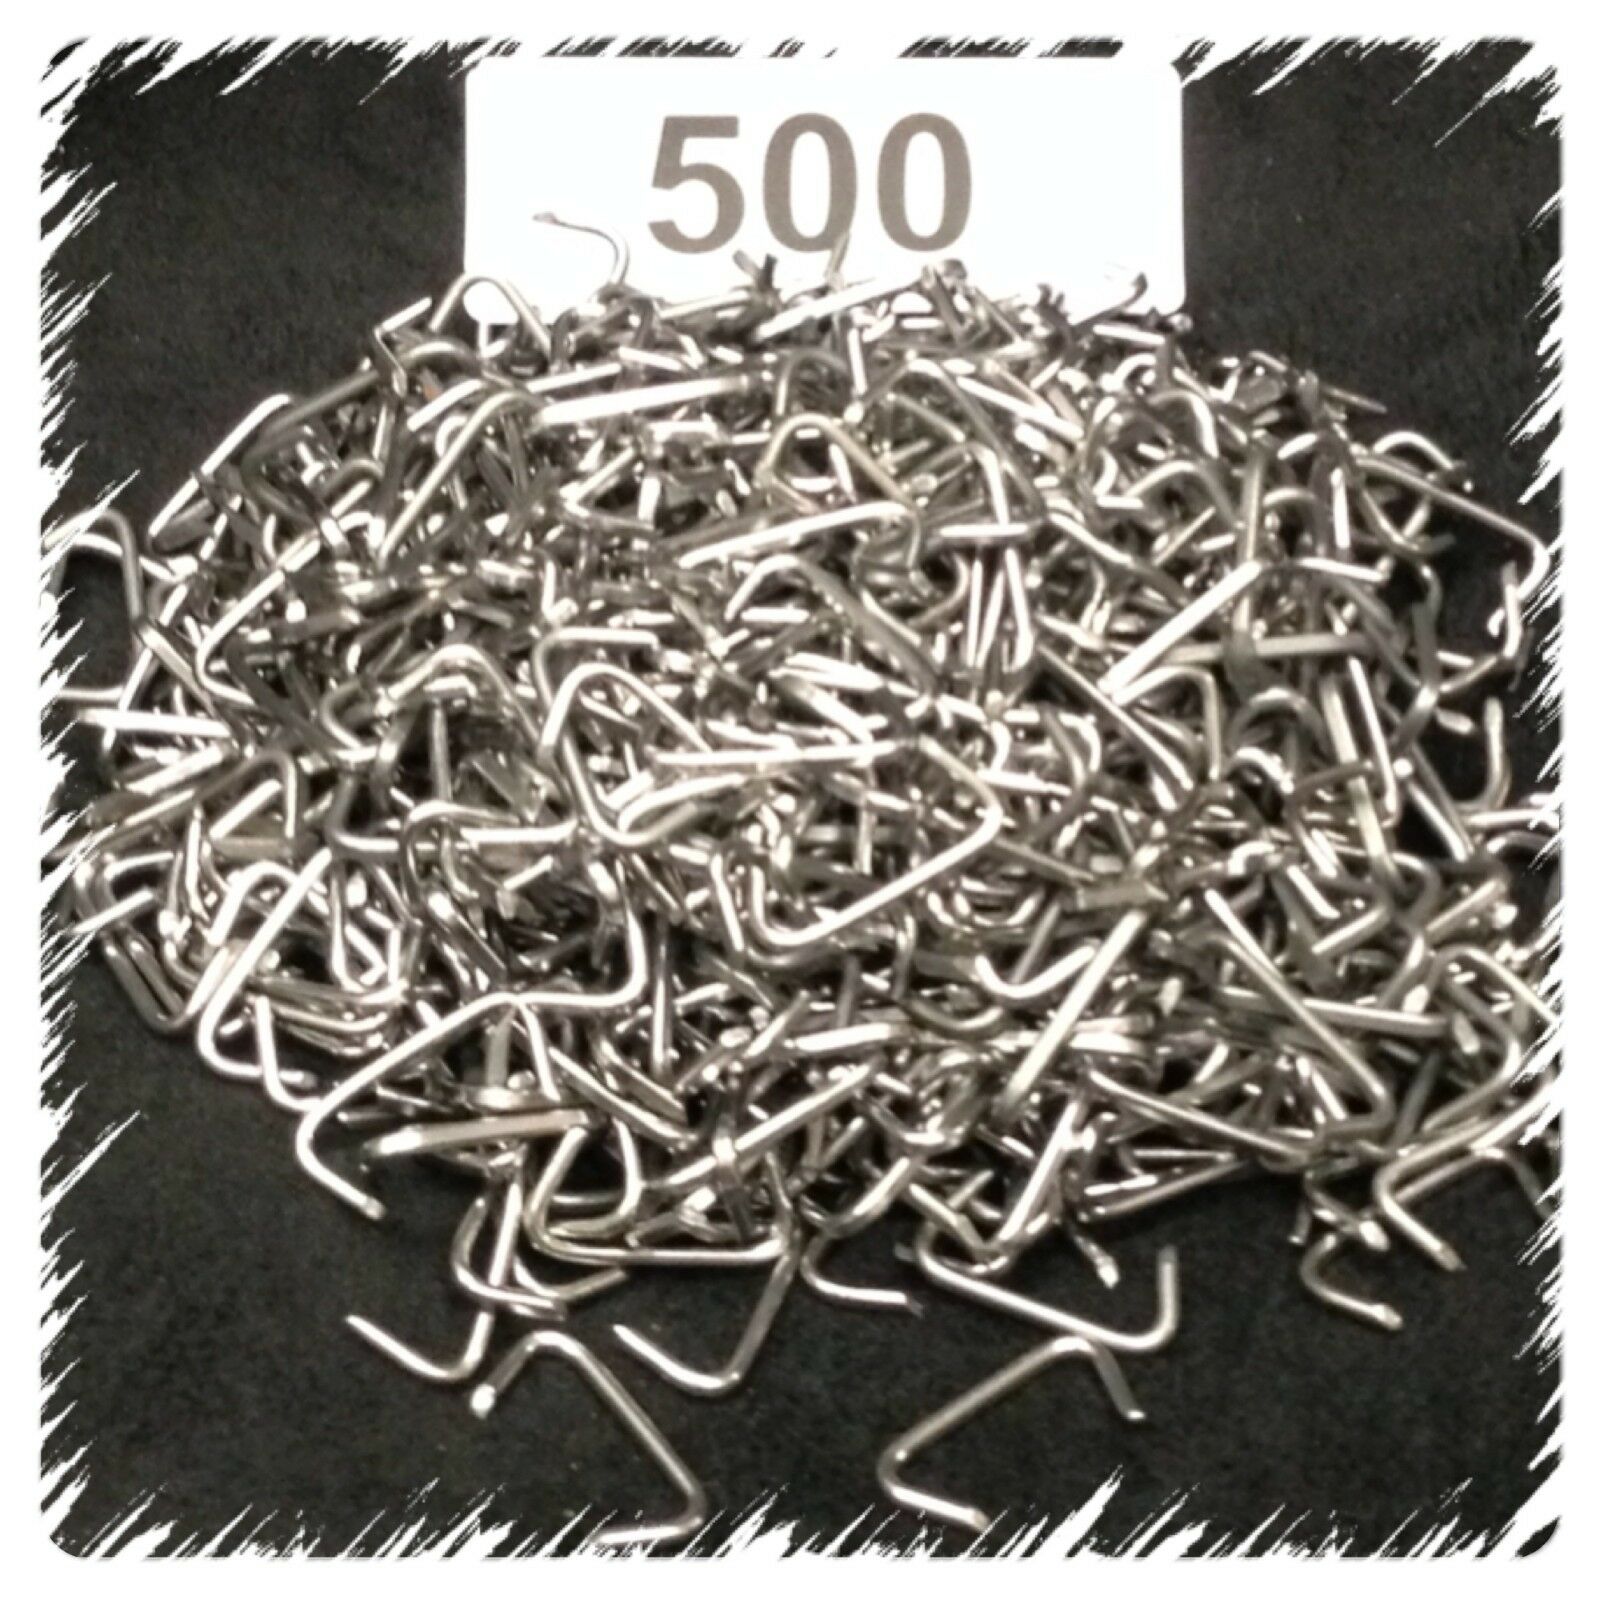 1 Lb. Hog Rings (450-500) 14 Gauge 3/4" Seat Upholstery Cage Fence Netting  Usa